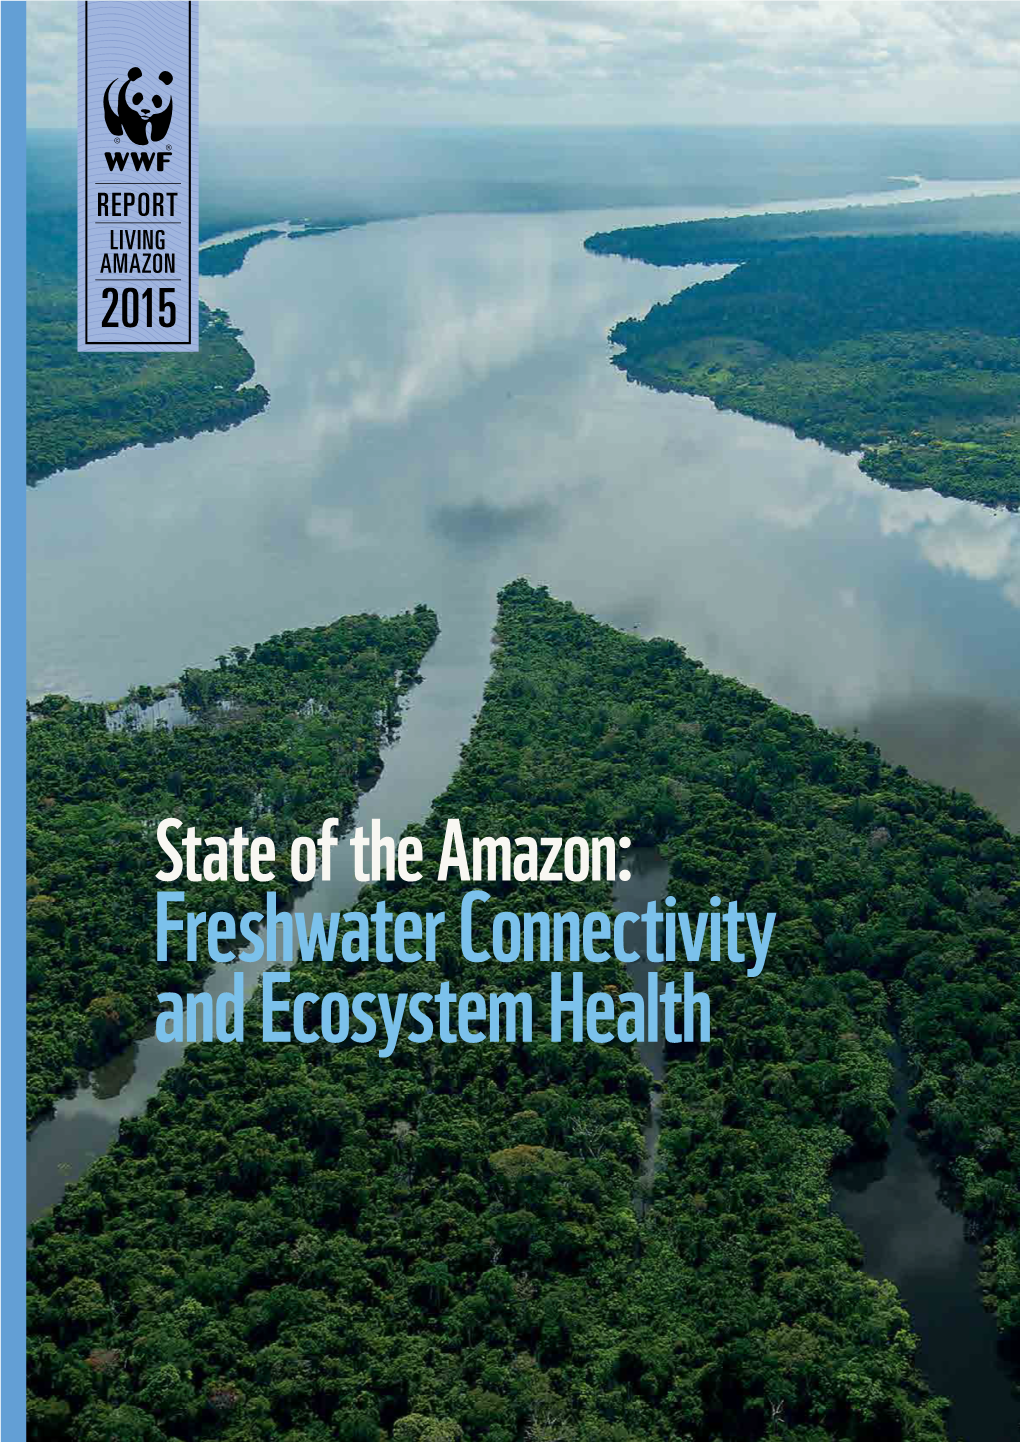 Freshwater Connectivity and Ecosystem Health WWF LIVING AMAZON INITIATIVE SUGGESTED CITATION